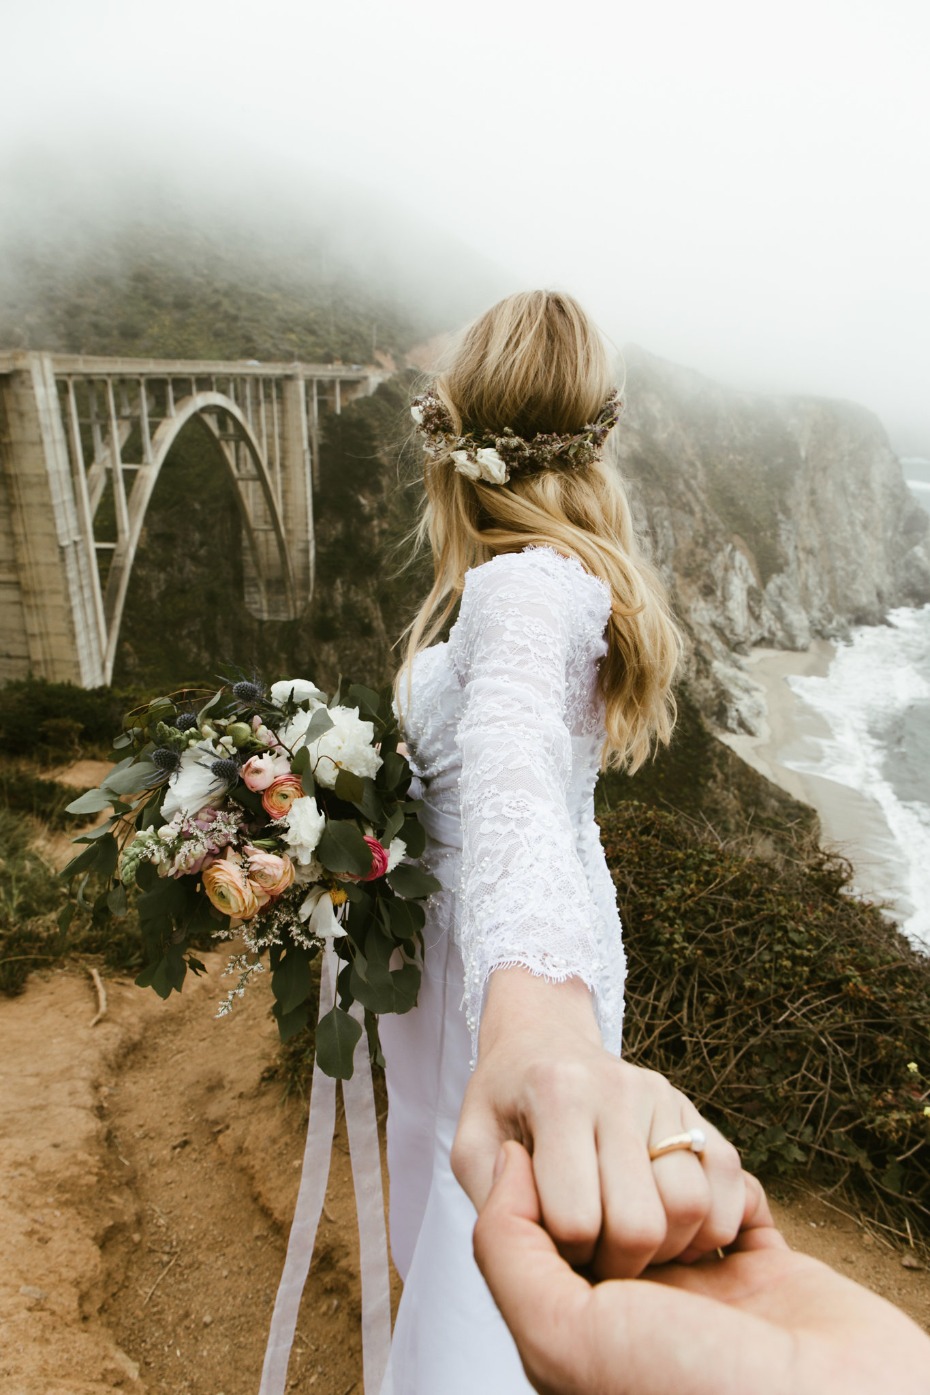 Let's get married on the coast